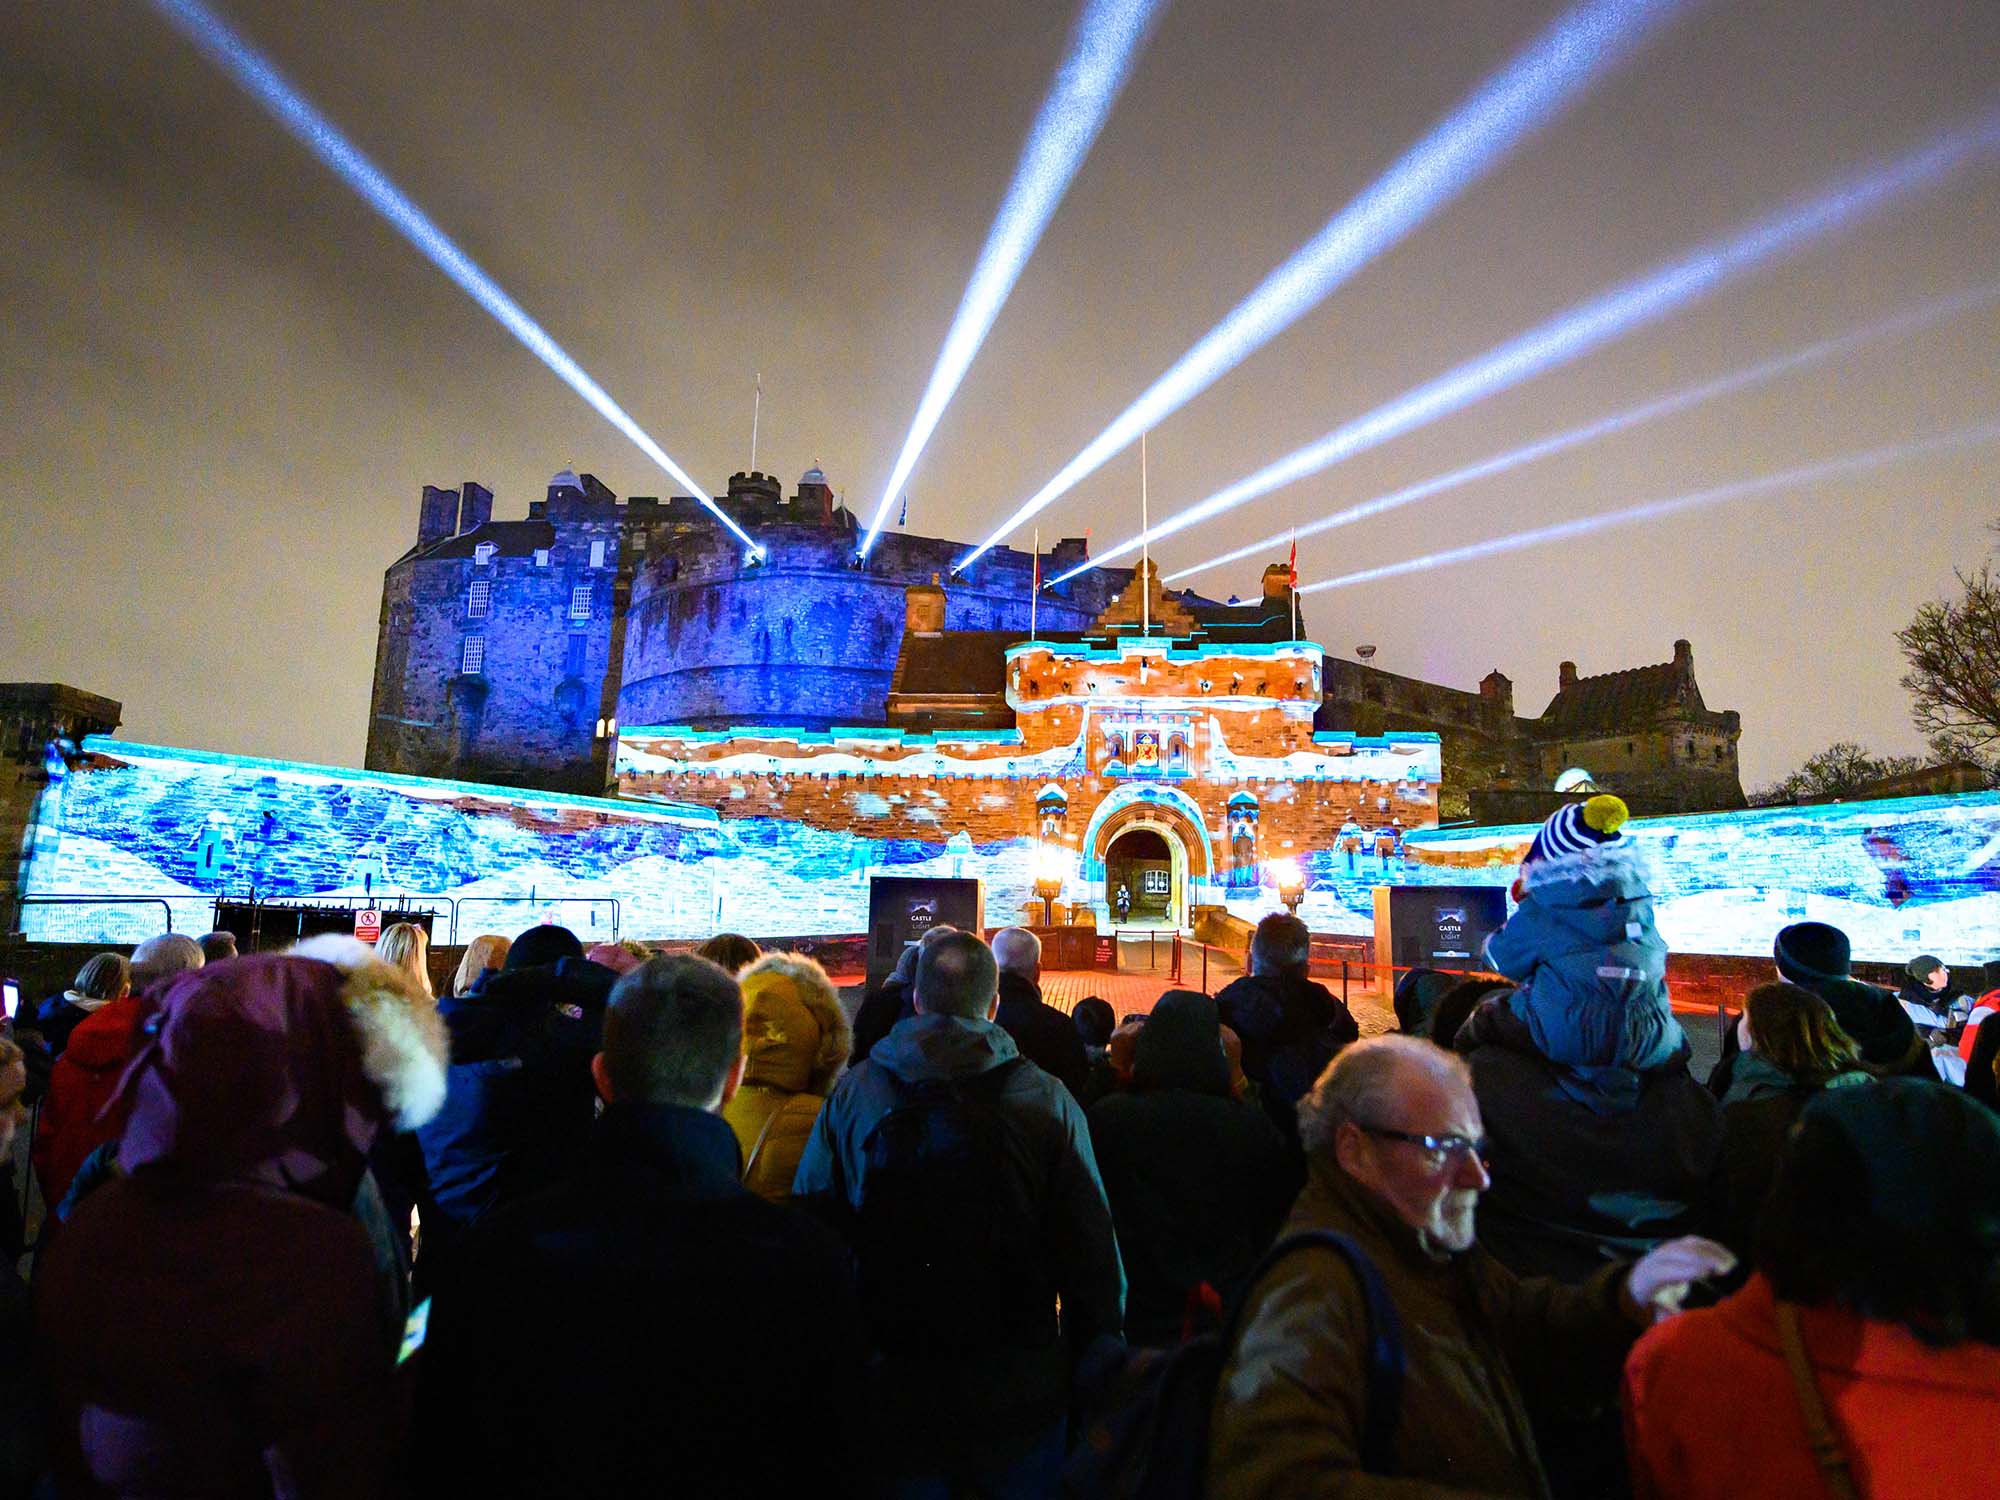 Castle of Light, Christmas Projections Show Light Walk